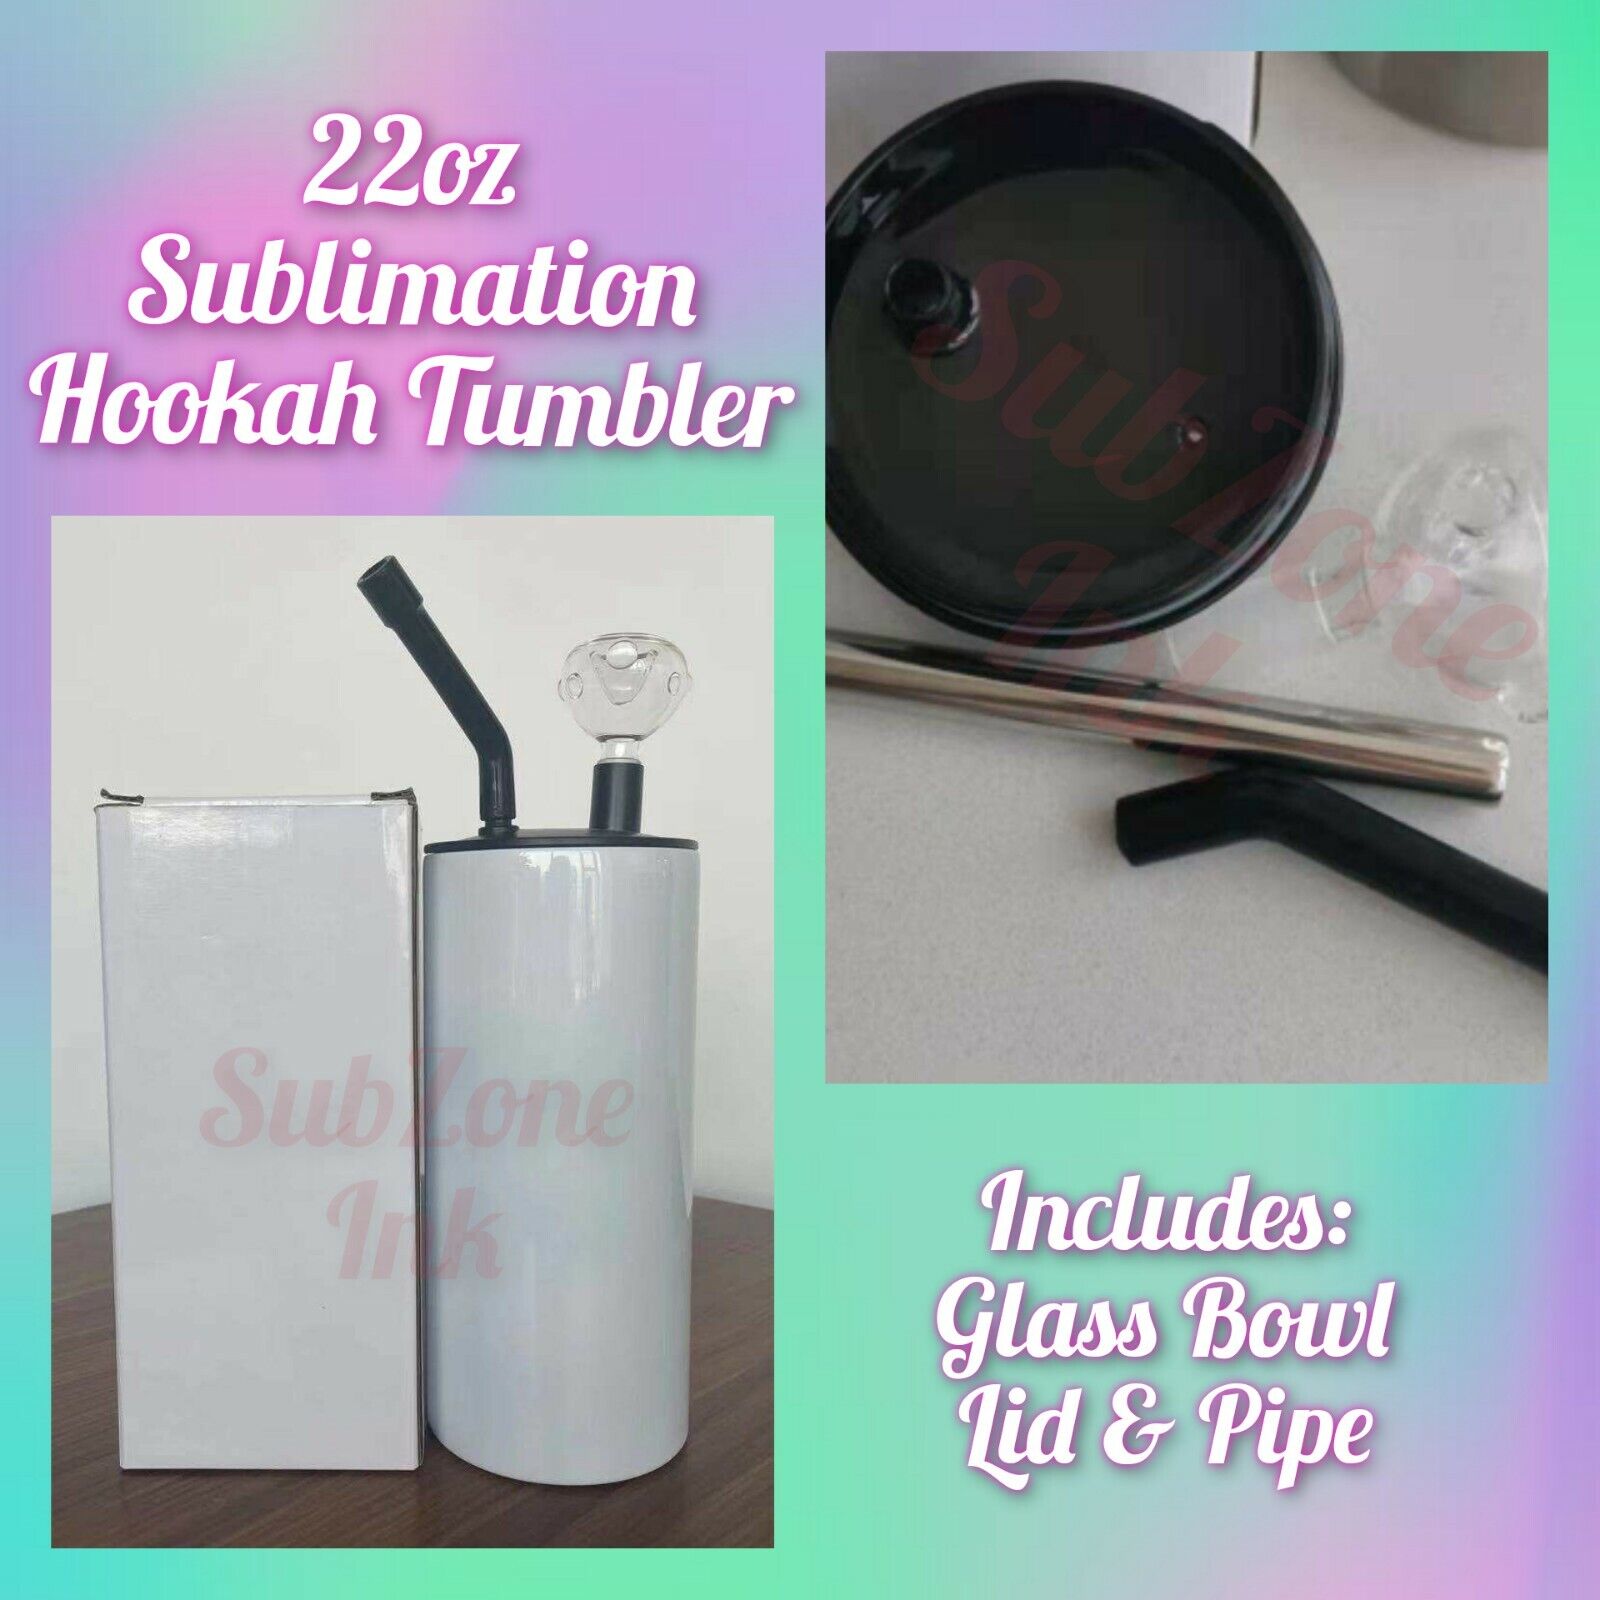 22oz Sublimation Hookah Tumbler Straight Blank w/ Glass Bowl, Lid and Pipe